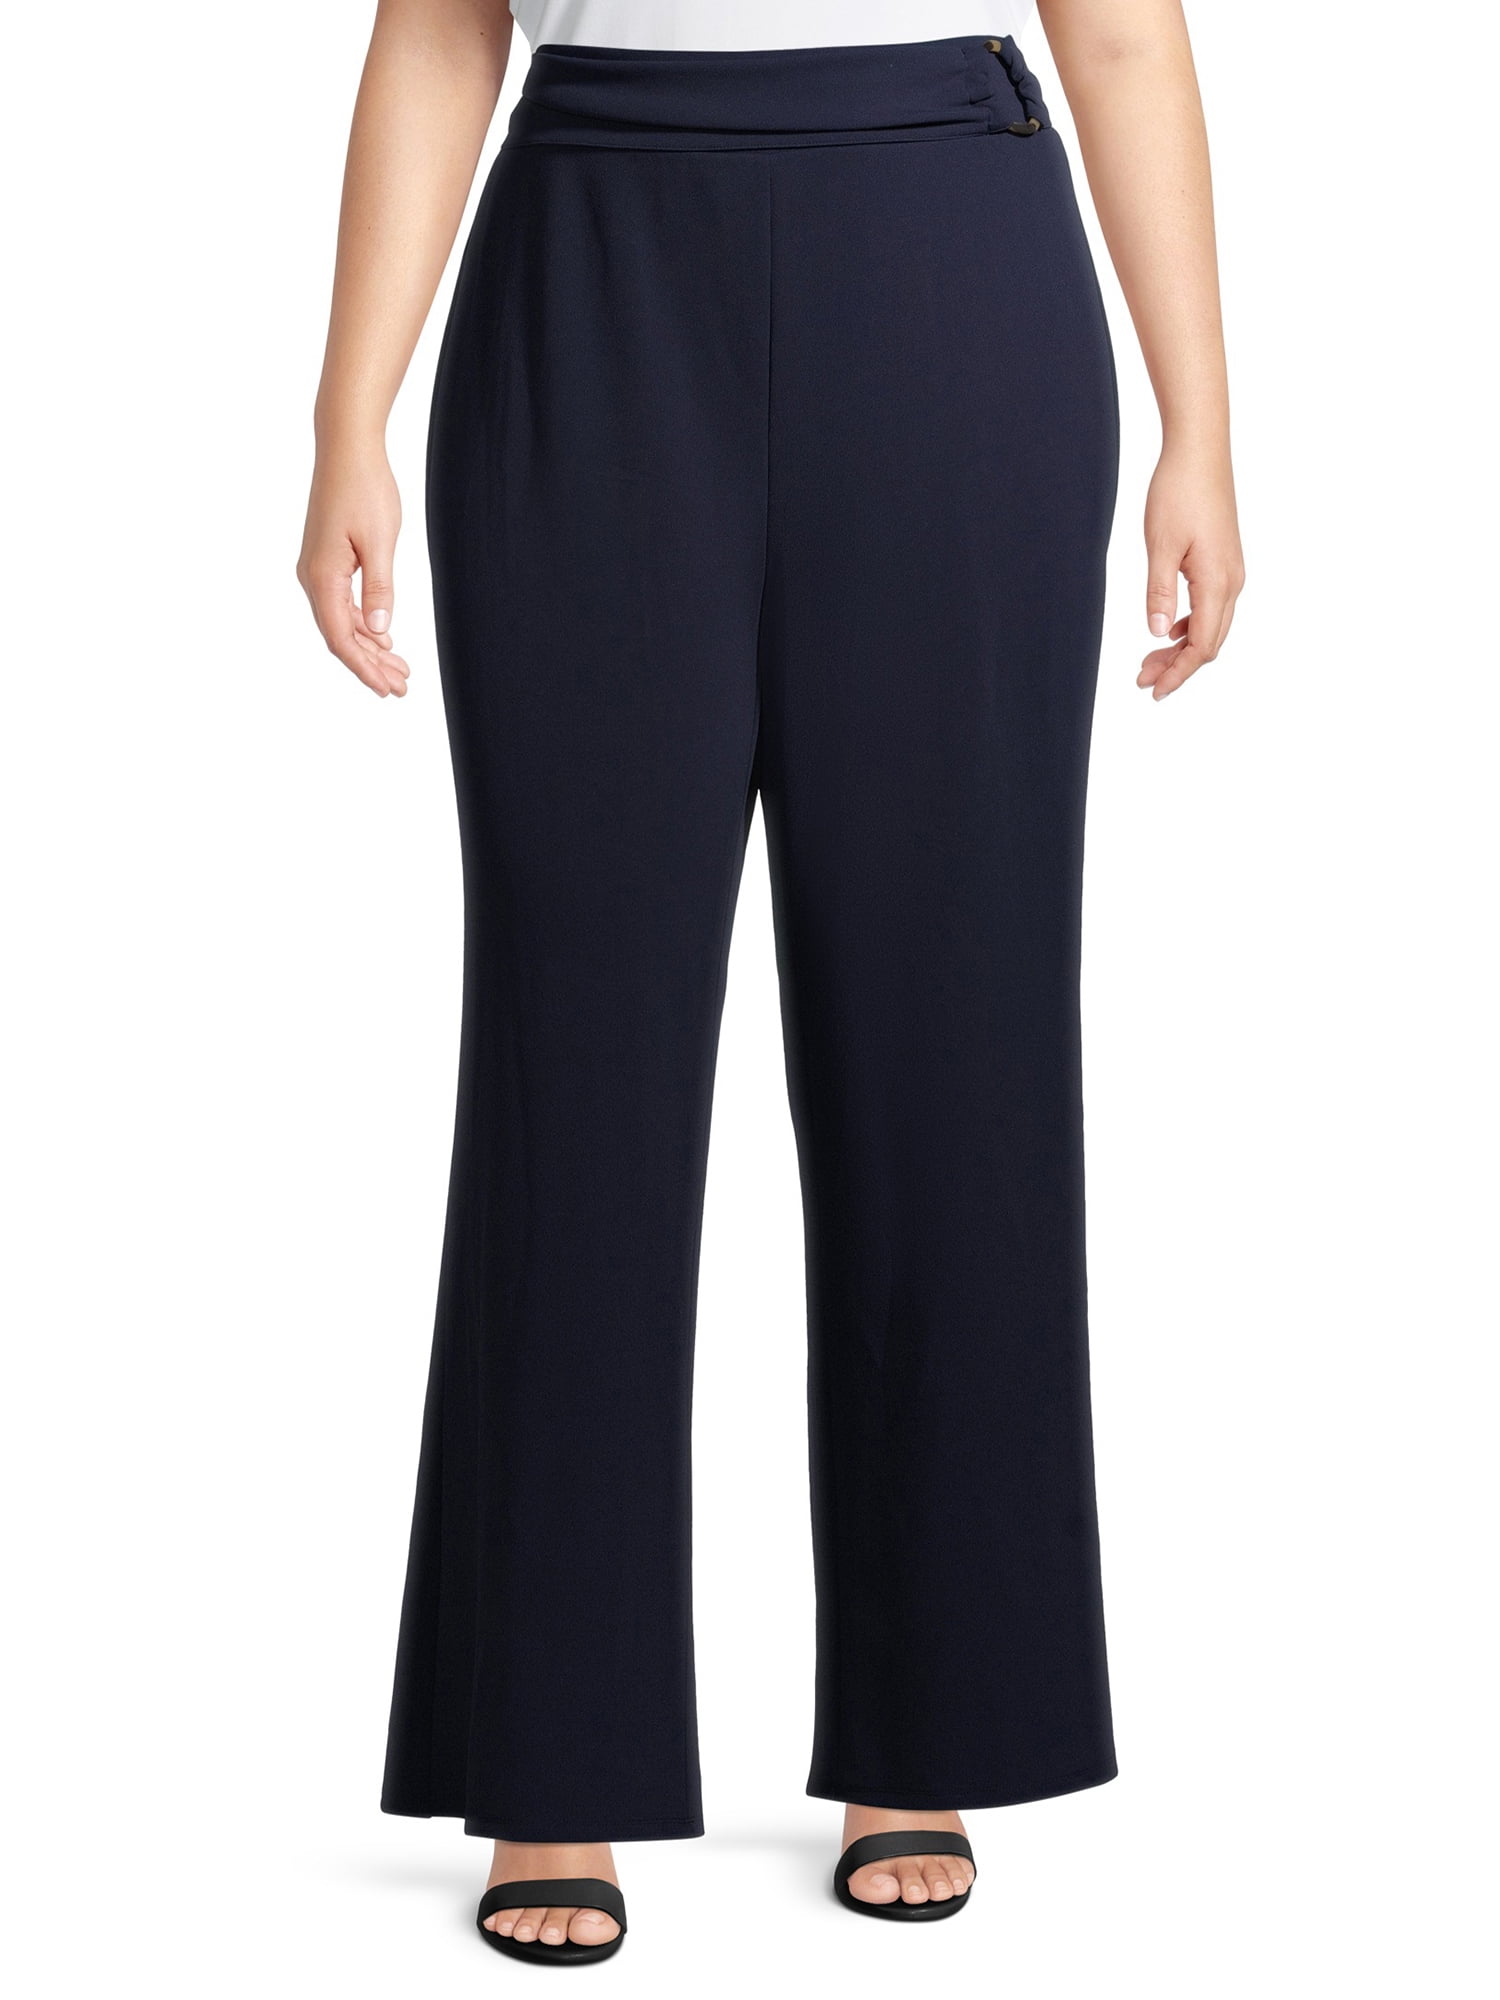 Heart N' Crush Plus Size Solid Wide Leg Pants with Foldover Waist 